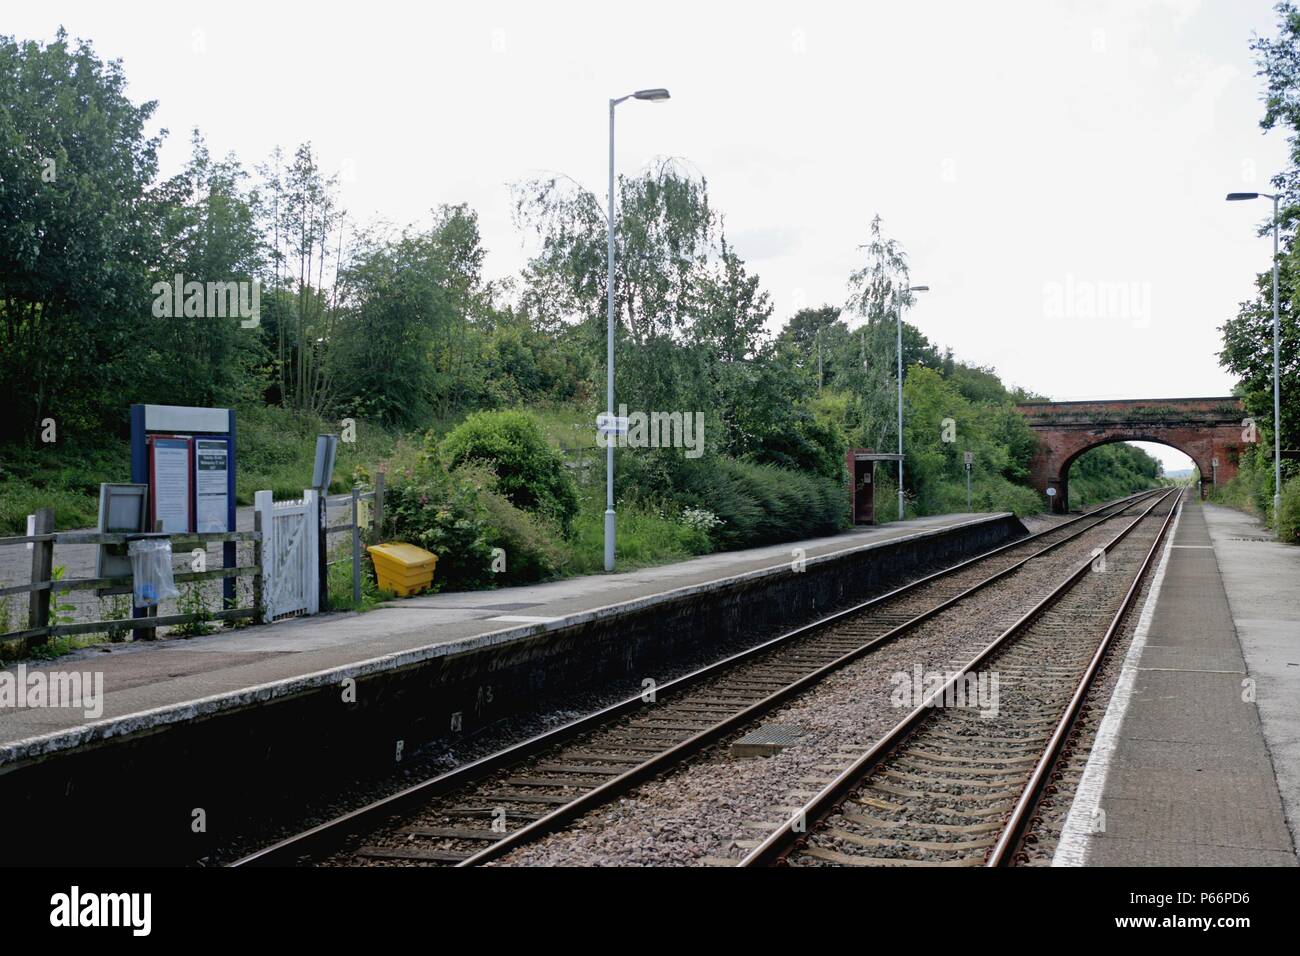 General view of the platforms and lighting at Elton and Orston station, Lincolnshire showing information signs and timetables. 2007 Stock Photo